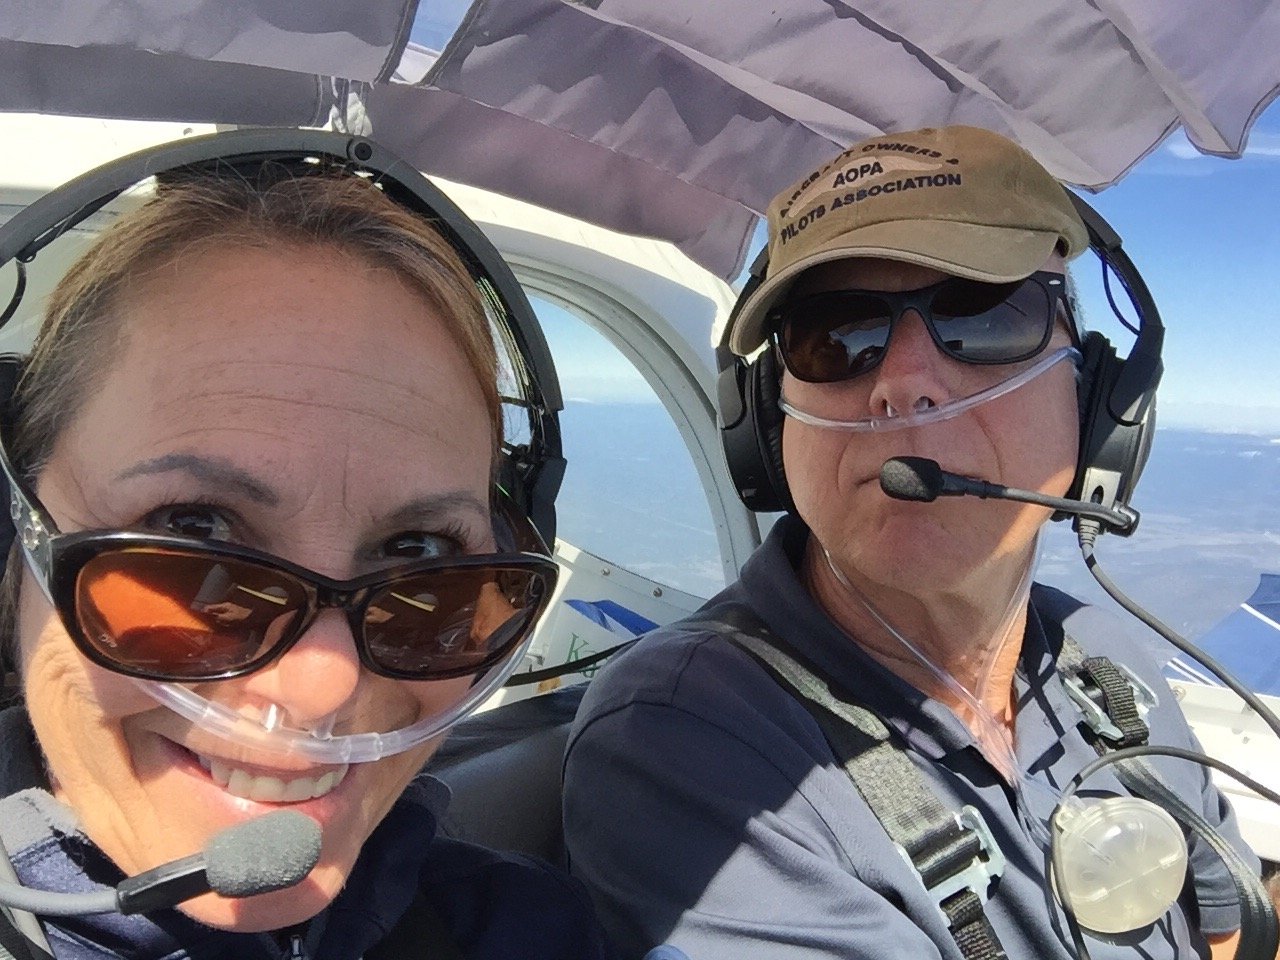 Our adventures in our RV7 airplane